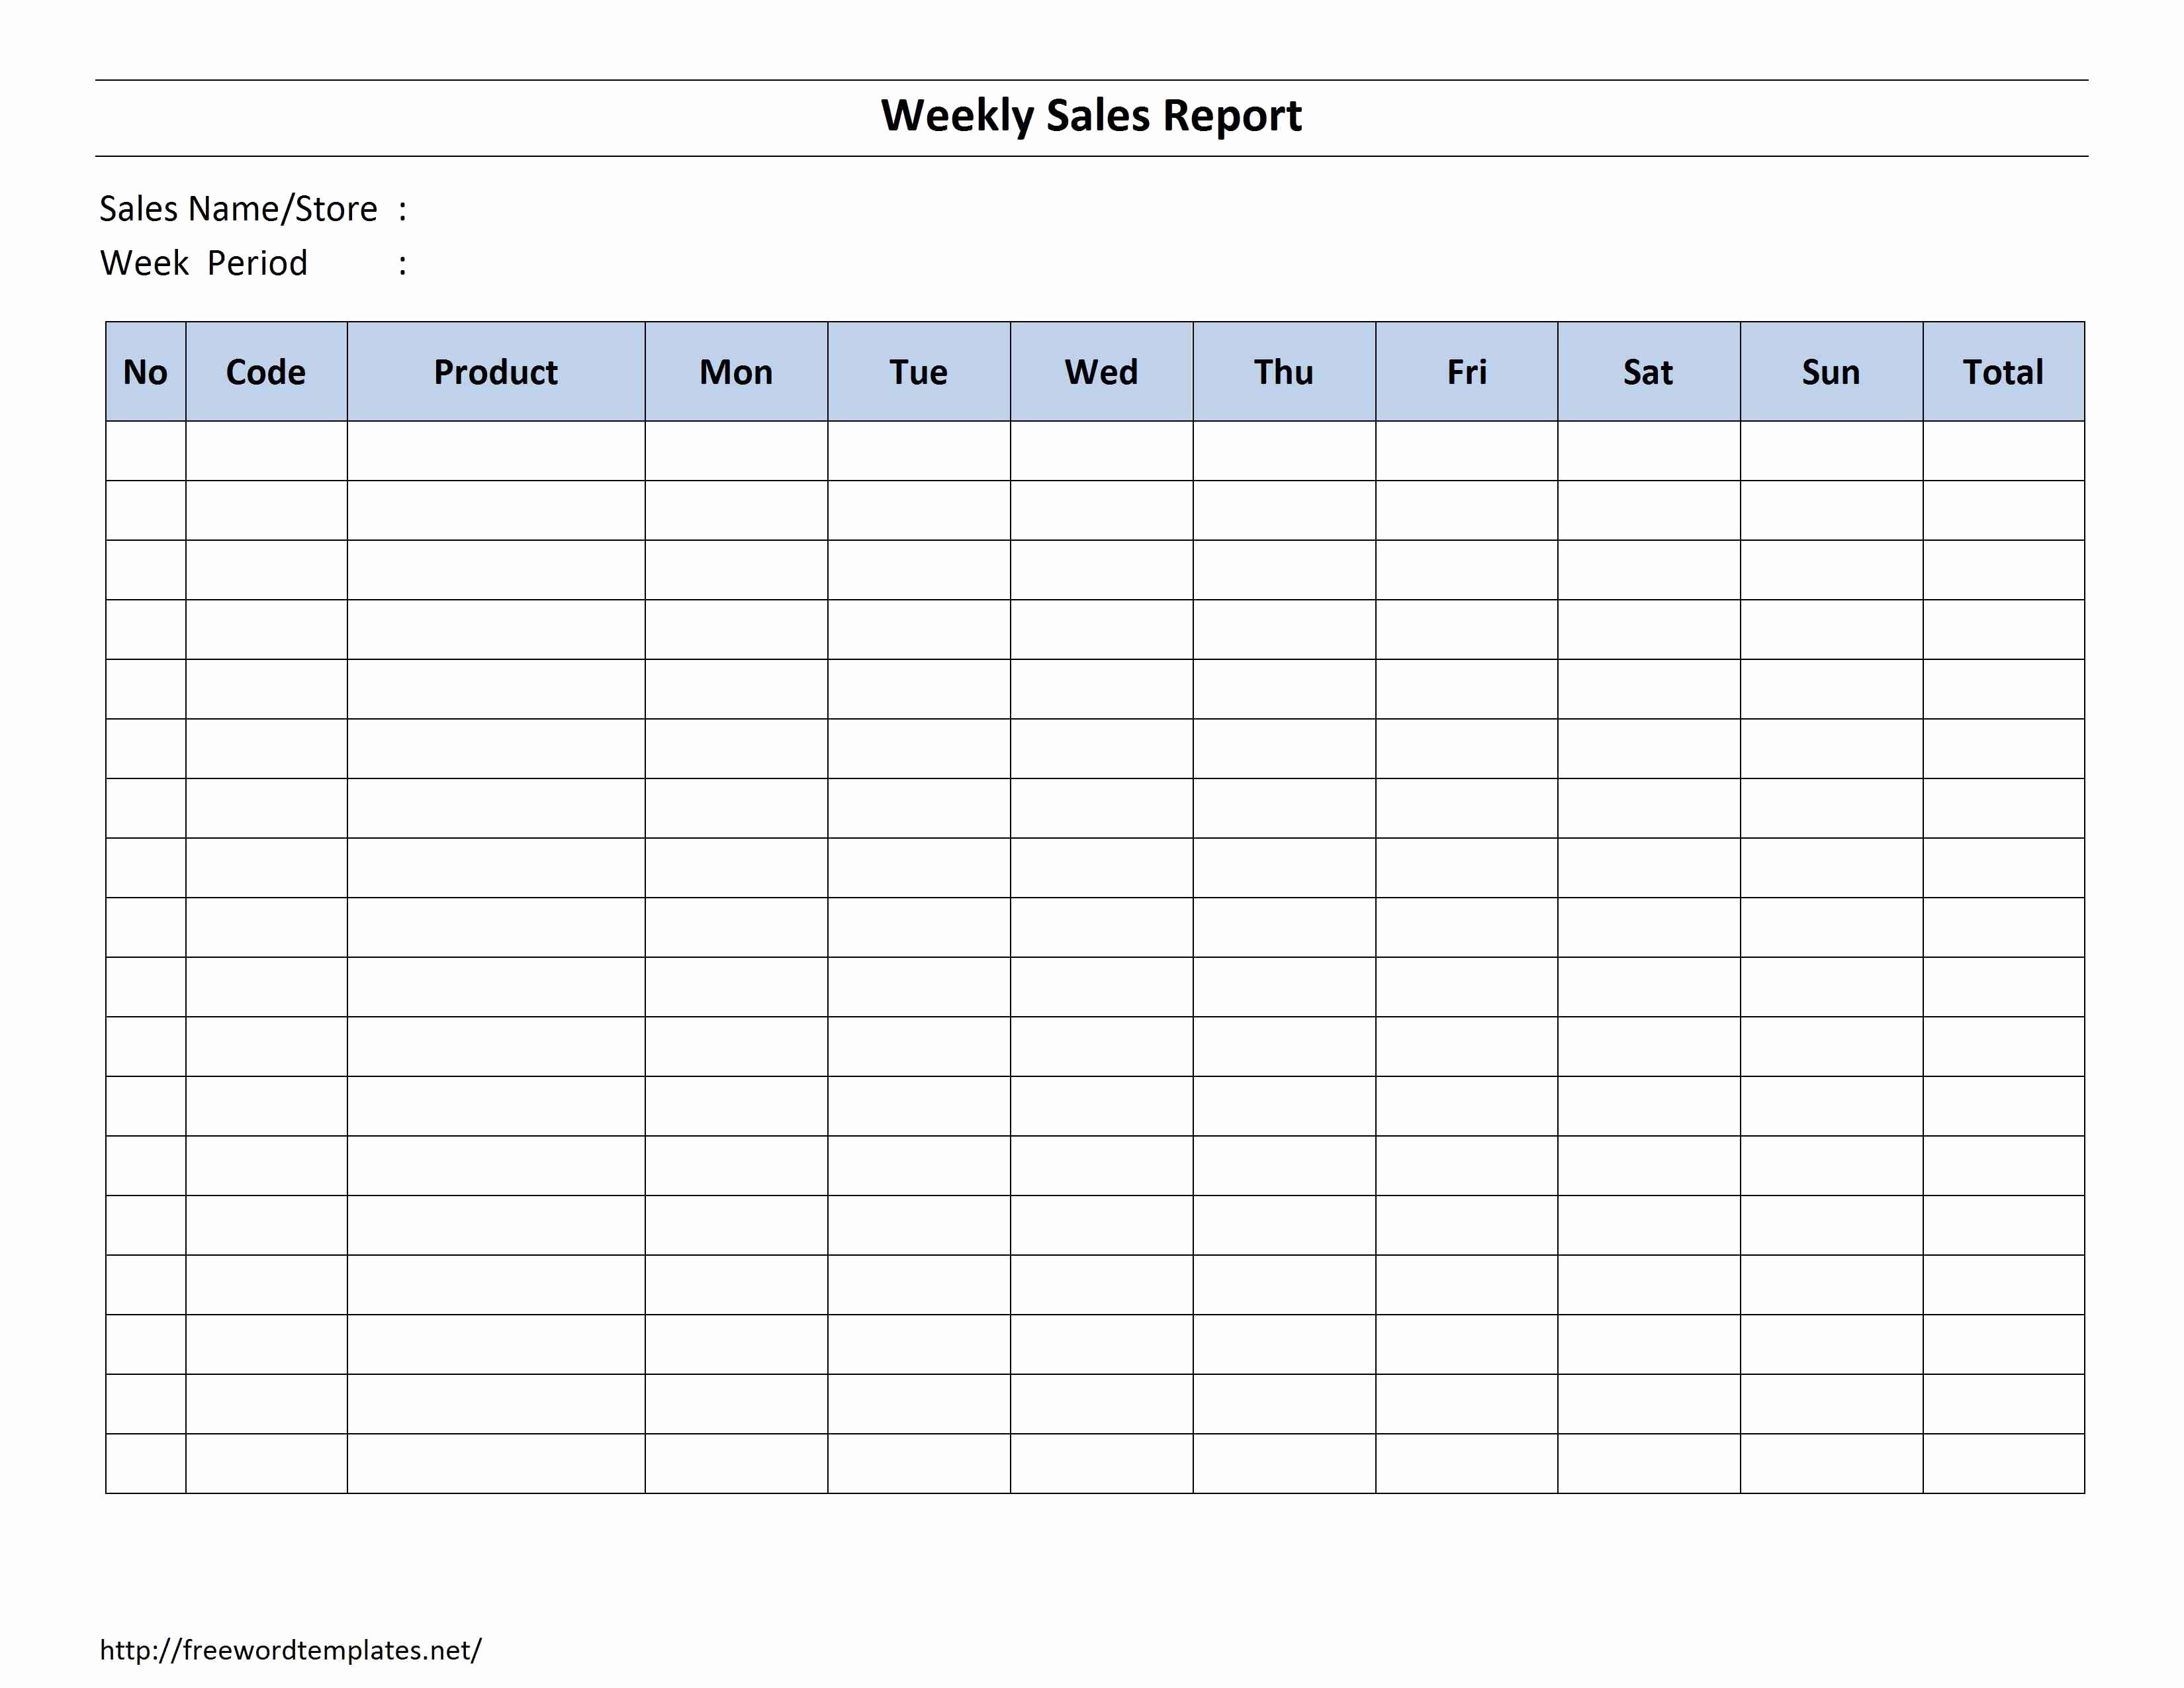 Weekly Sales Reports Templates Unique Weekly Sales Report